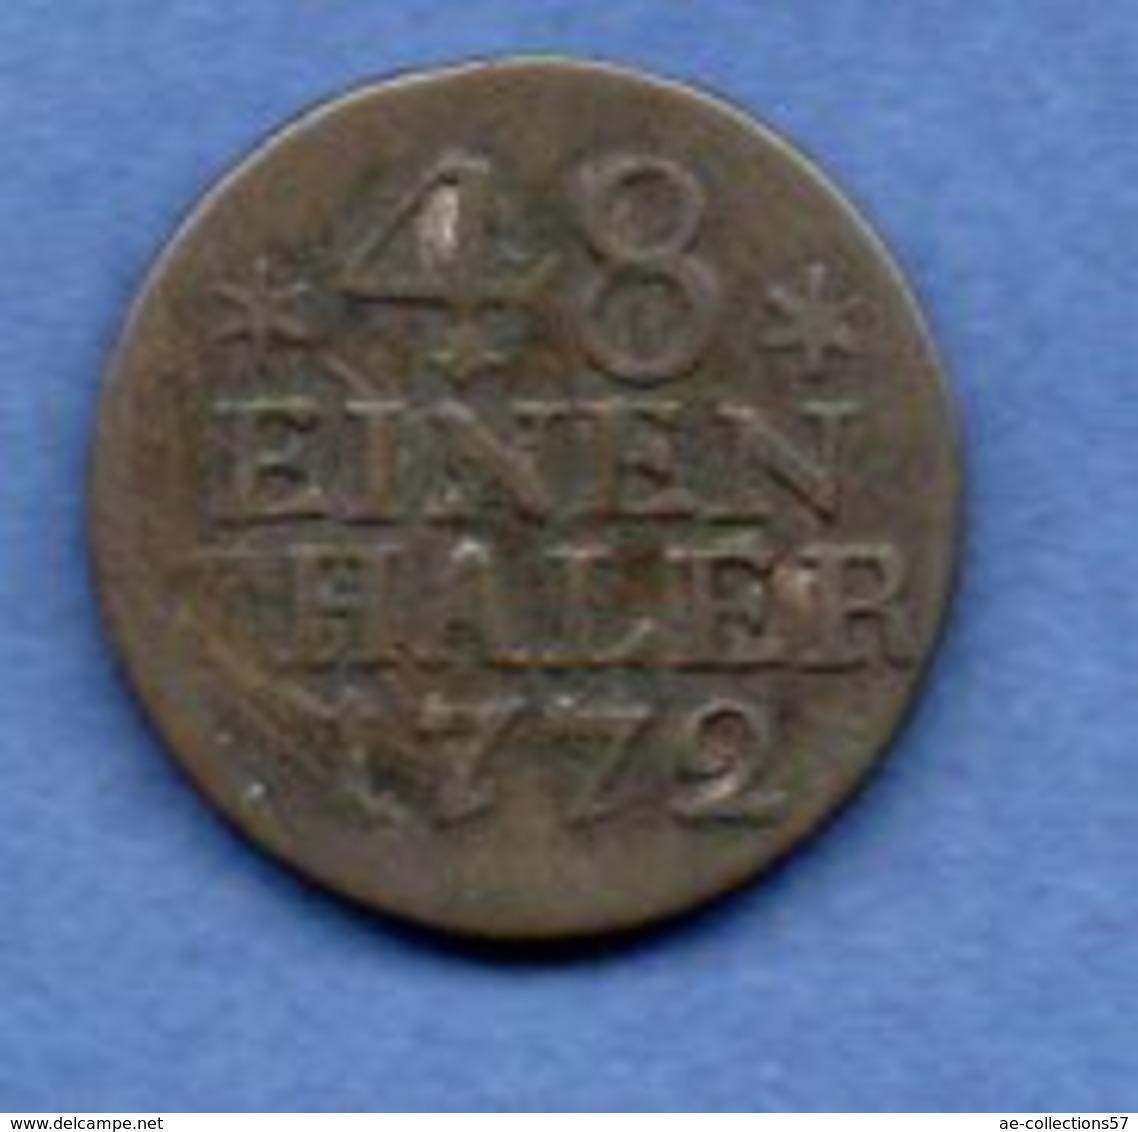 Prusse -  1 /48 Thaler 1772 A  -  Km # 327  -  état  TB+ - Small Coins & Other Subdivisions